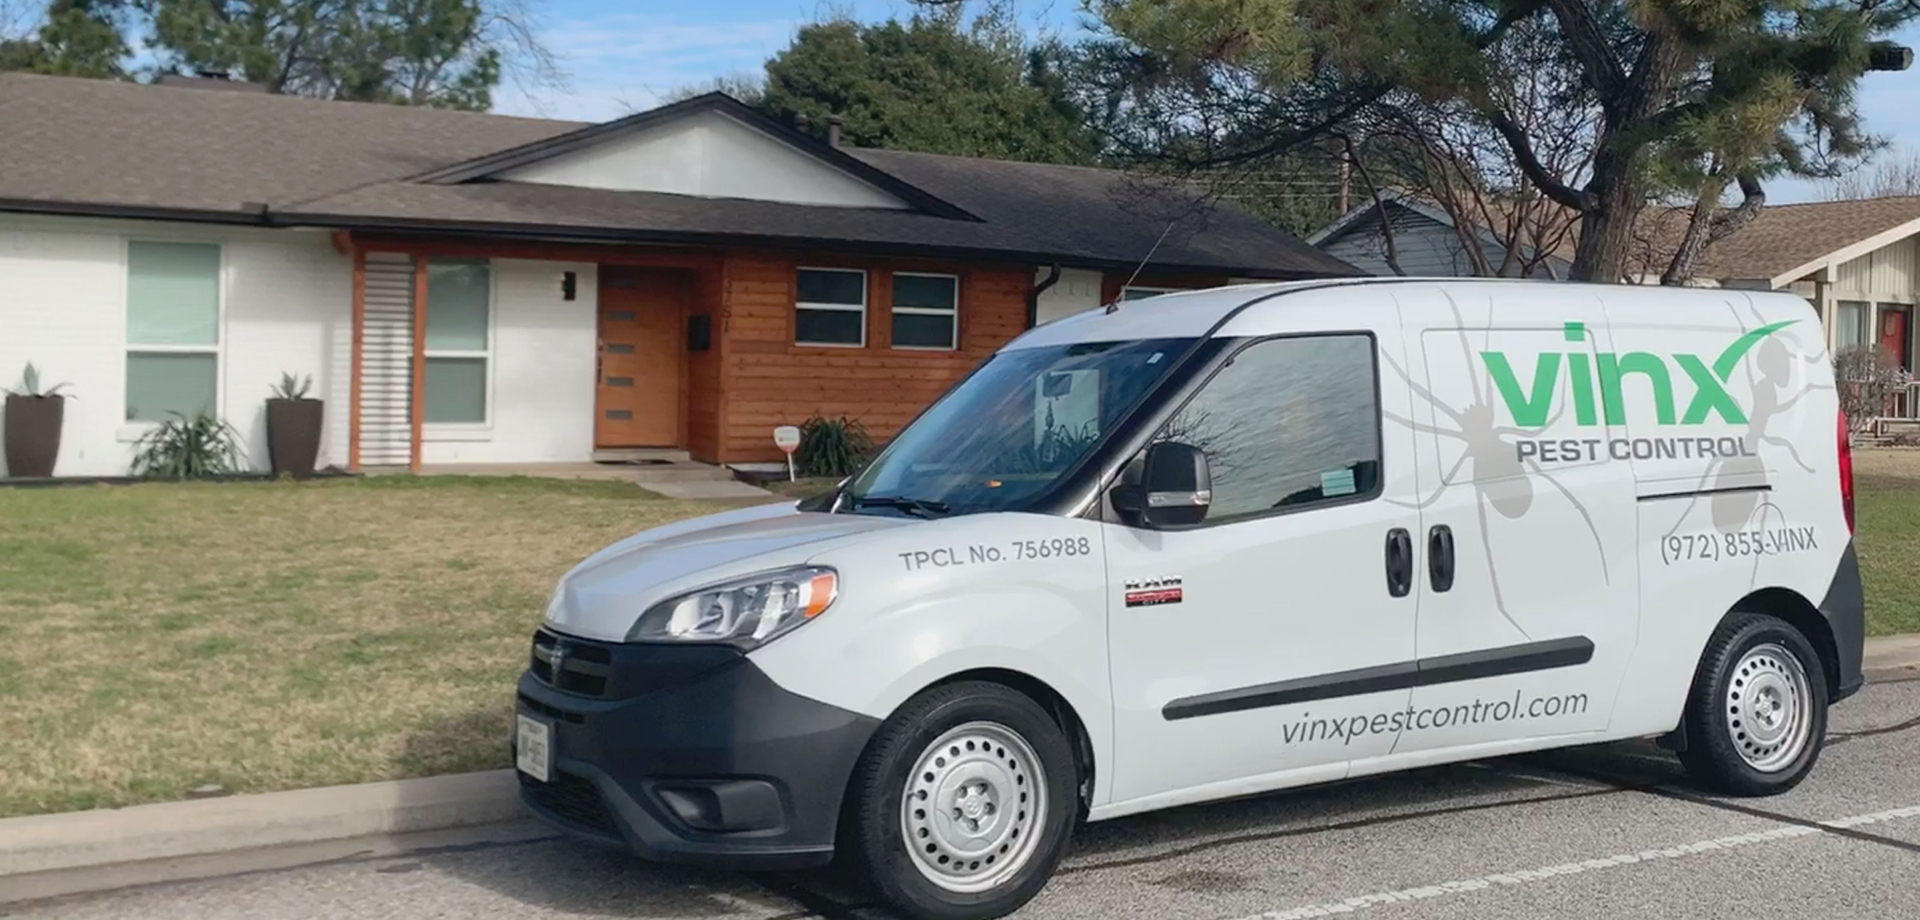 The BEST Pest Control in Columbia, South Carolina